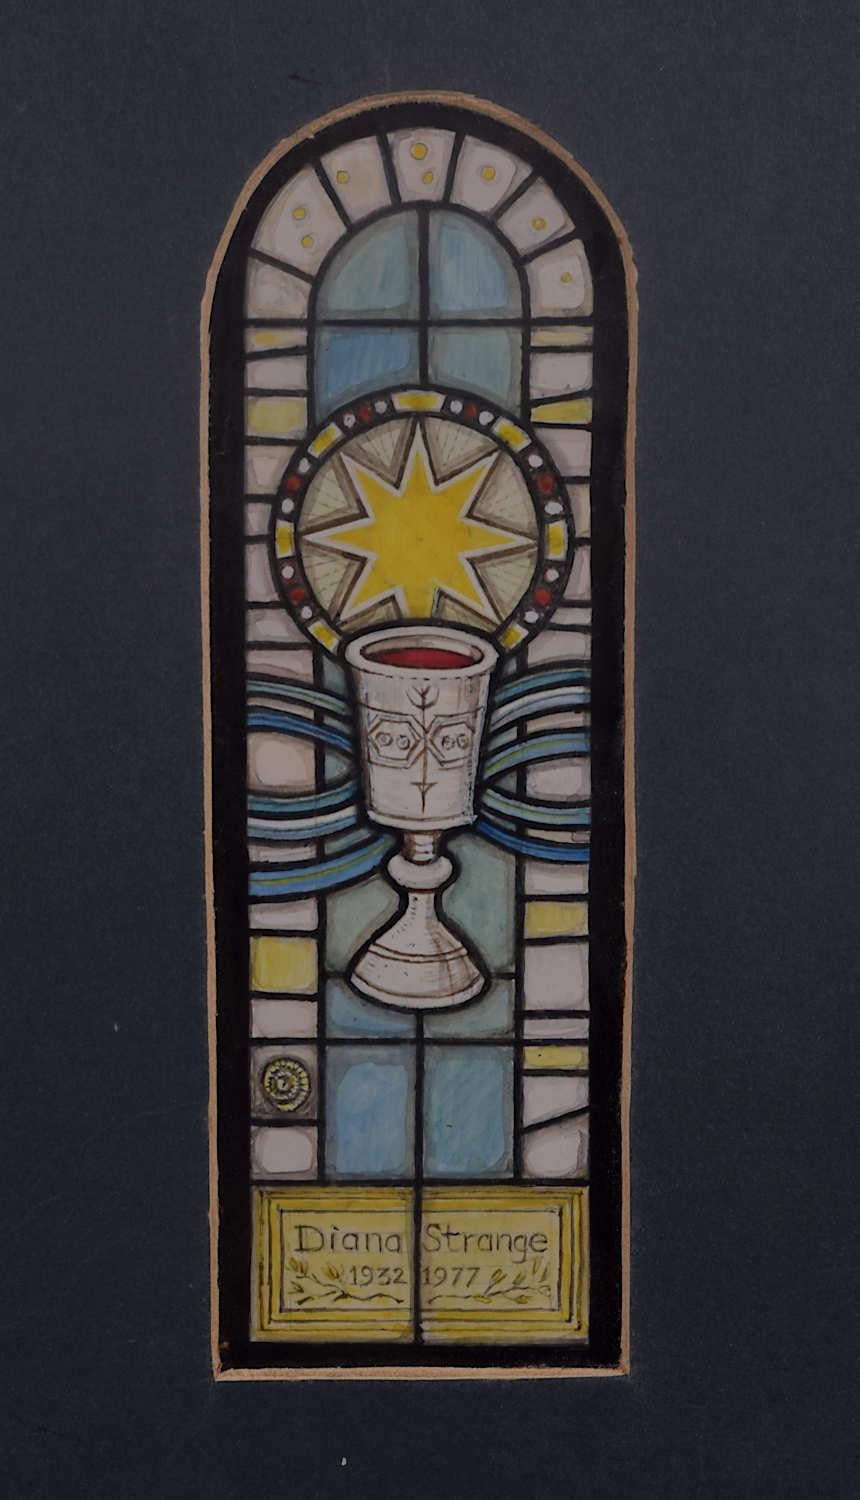 We acquired a series of watercolour stained glass designs from Jane Gray's studio. To find more scroll down to "More from this Seller" and below it click on "See all from this seller." 

Jane Gray (b.1931)
Stained Glass Design
Watercolour
15.5 x 5